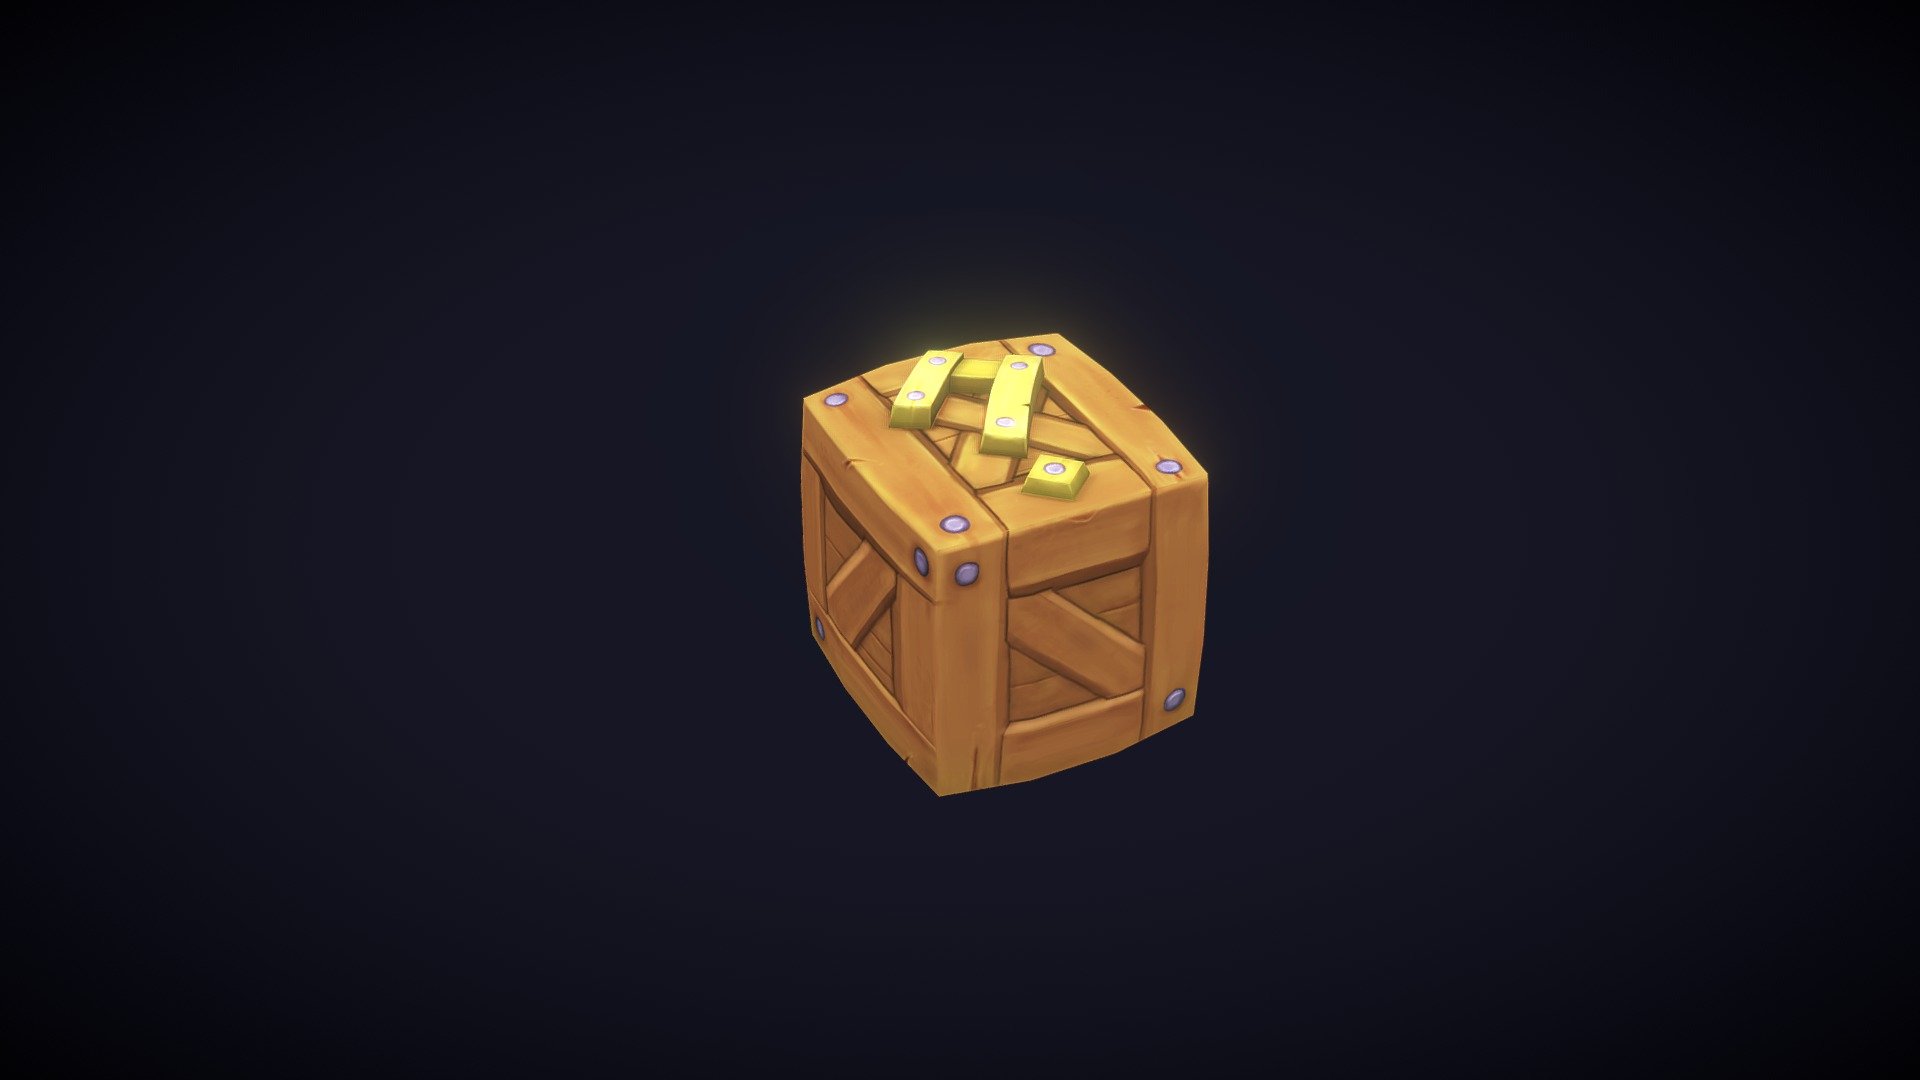 My quick handpainted study stuff - Question Box - Download Free 3D model by Duong Bui Duc (@duongbui04) 3d model